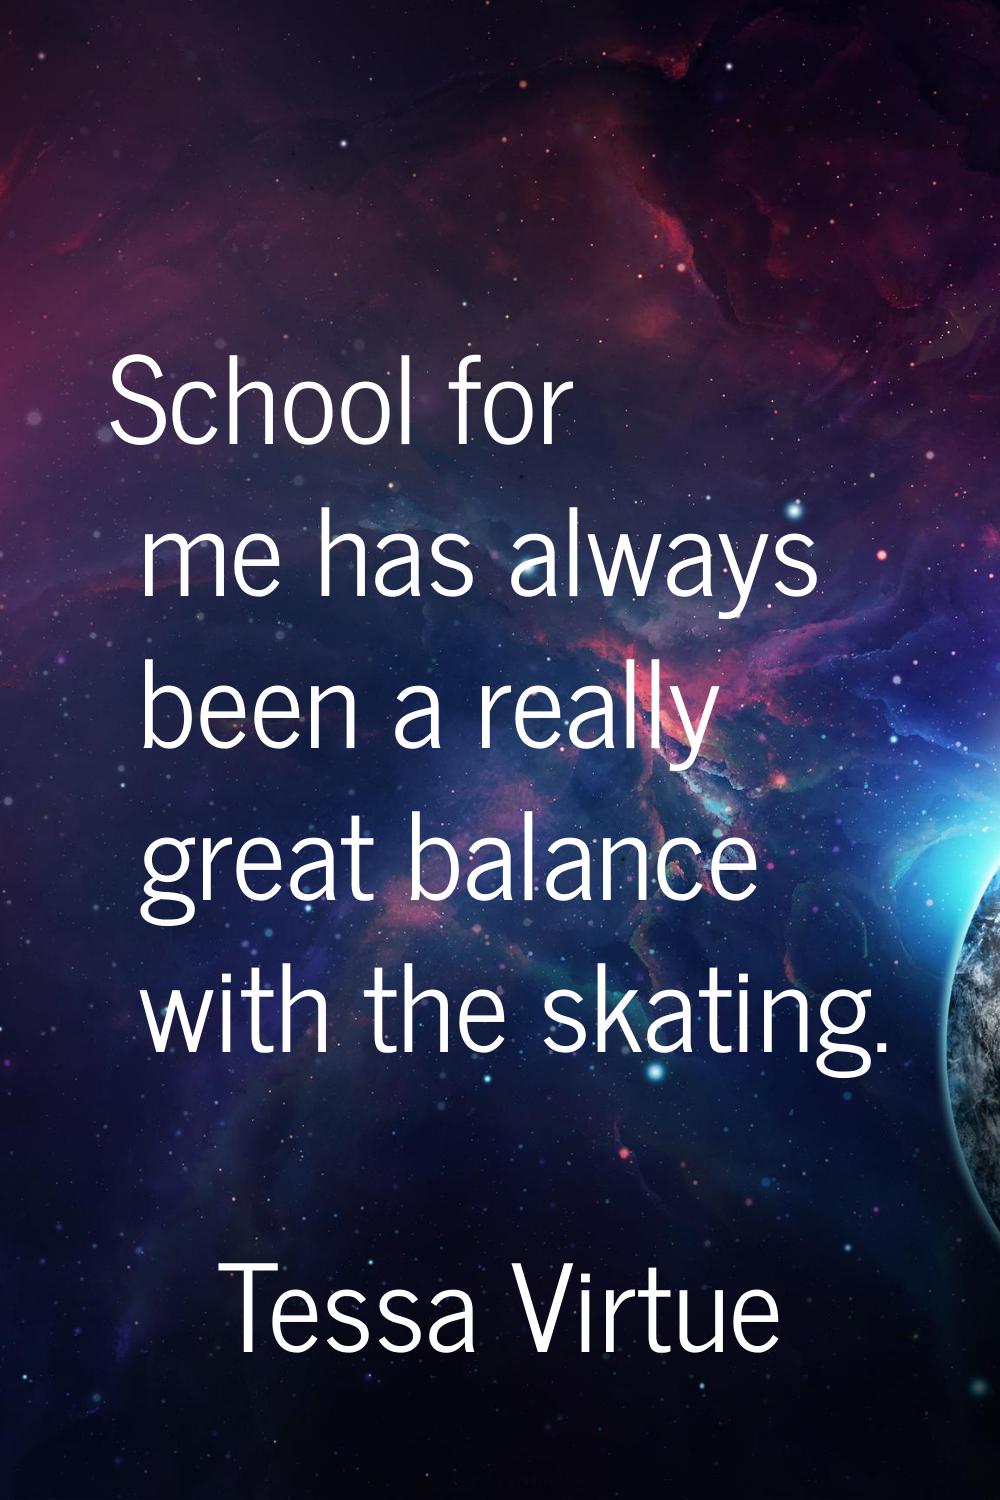 School for me has always been a really great balance with the skating.